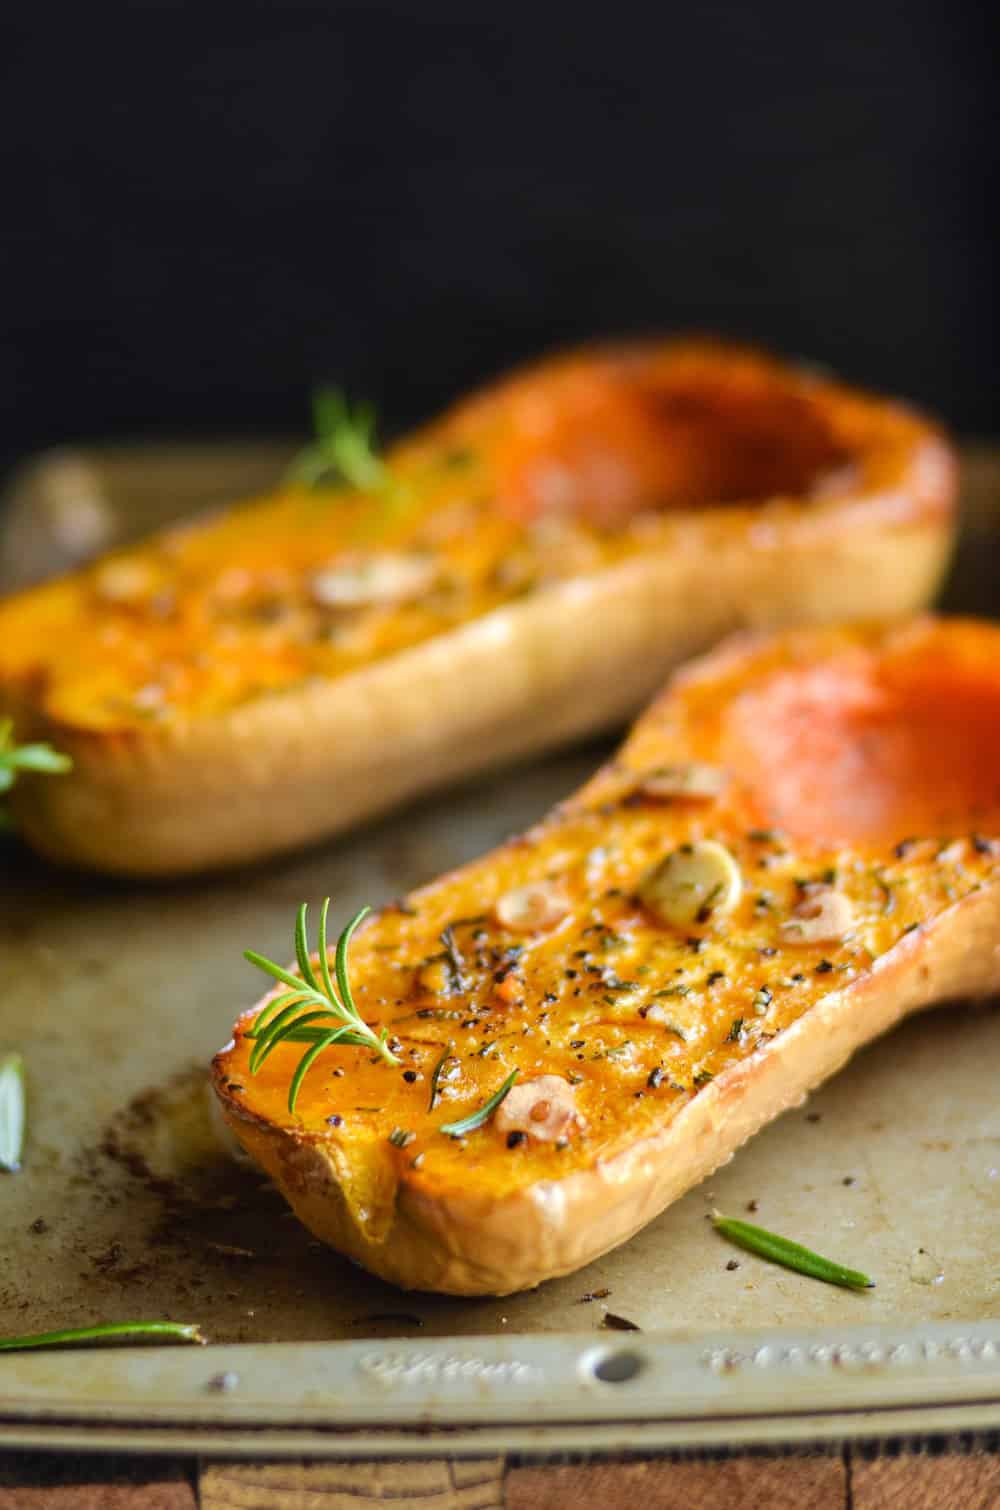 The garlic and rosemary make this roasted butternut squash recipe! Perfect for a weeknight dinner or even a side for a holiday.